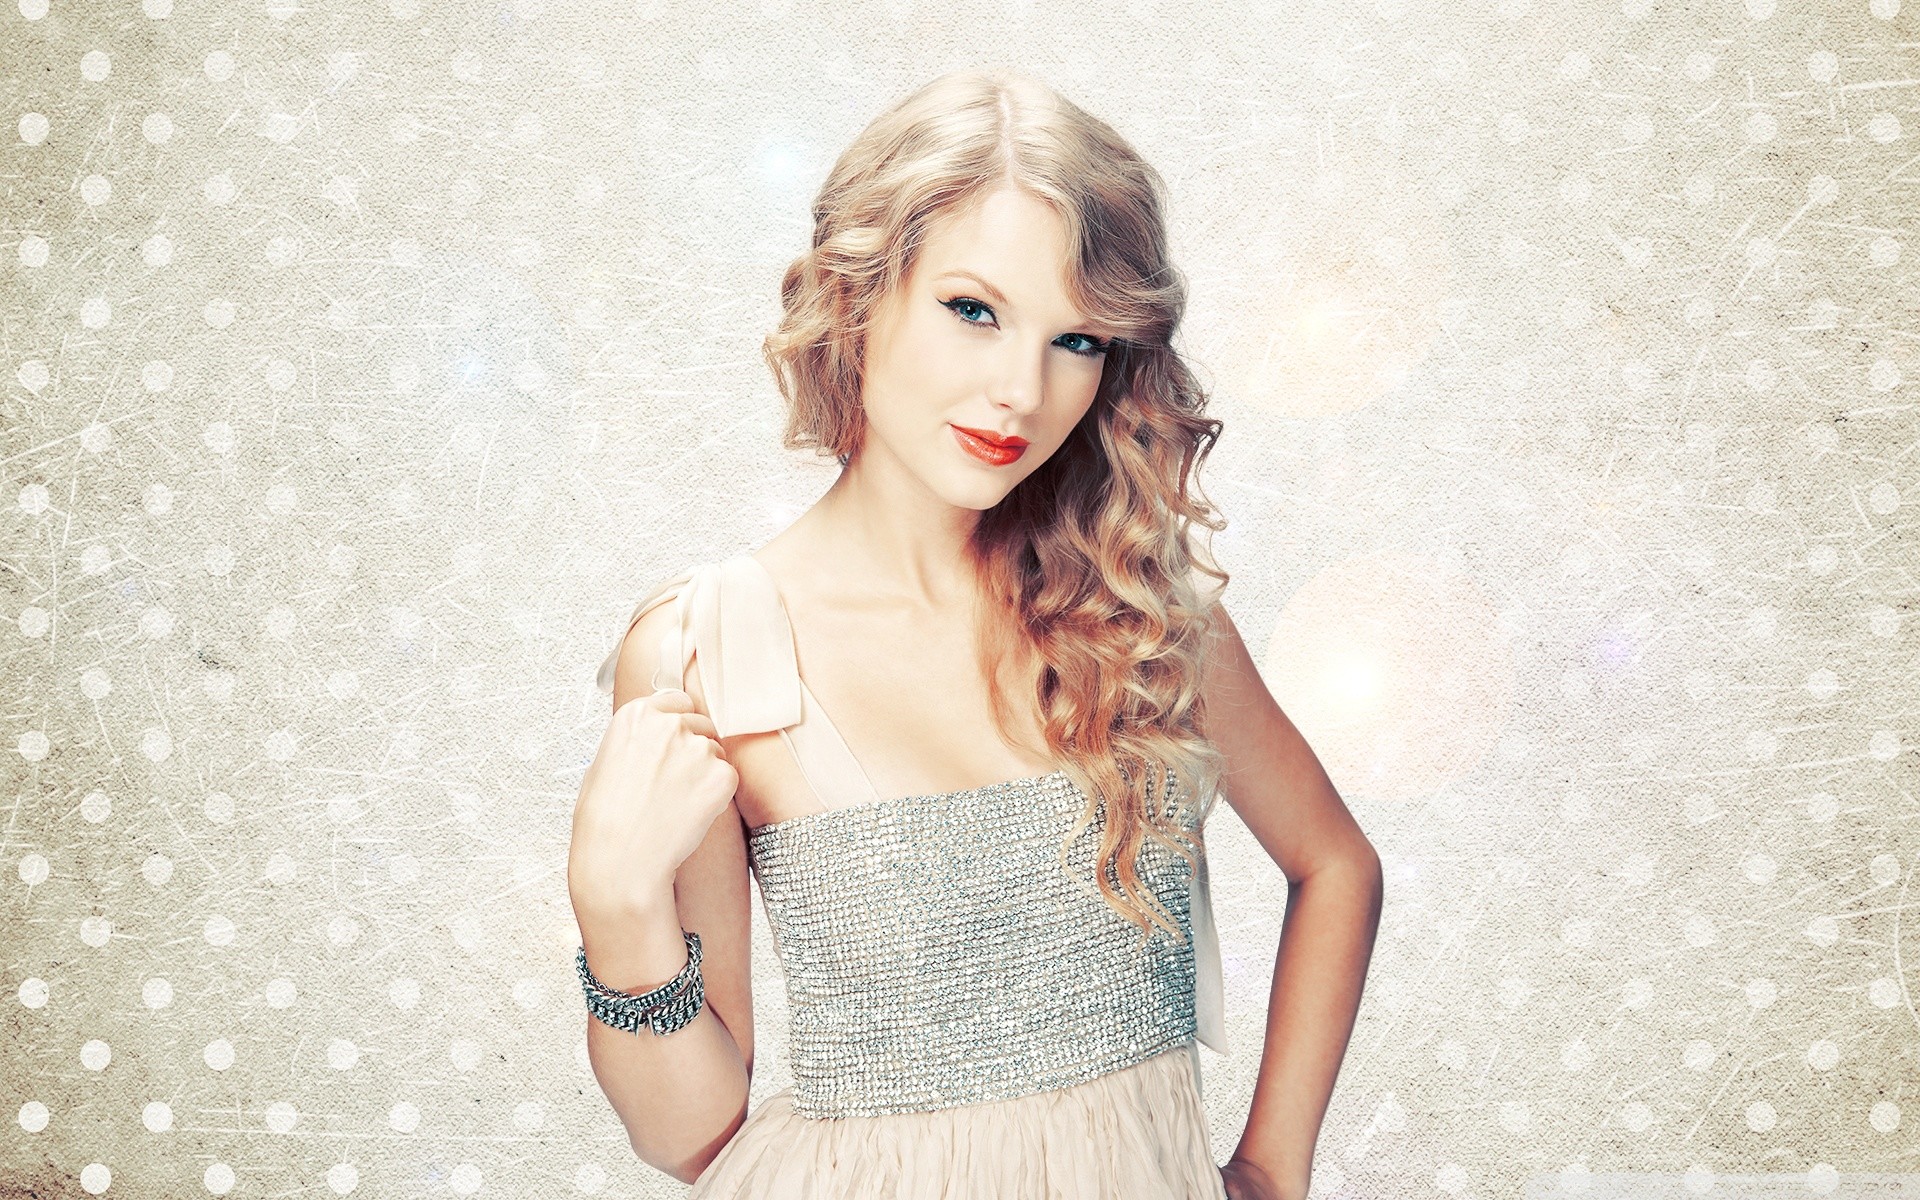 taylor swift wallpaper,hair,blond,clothing,hairstyle,beauty